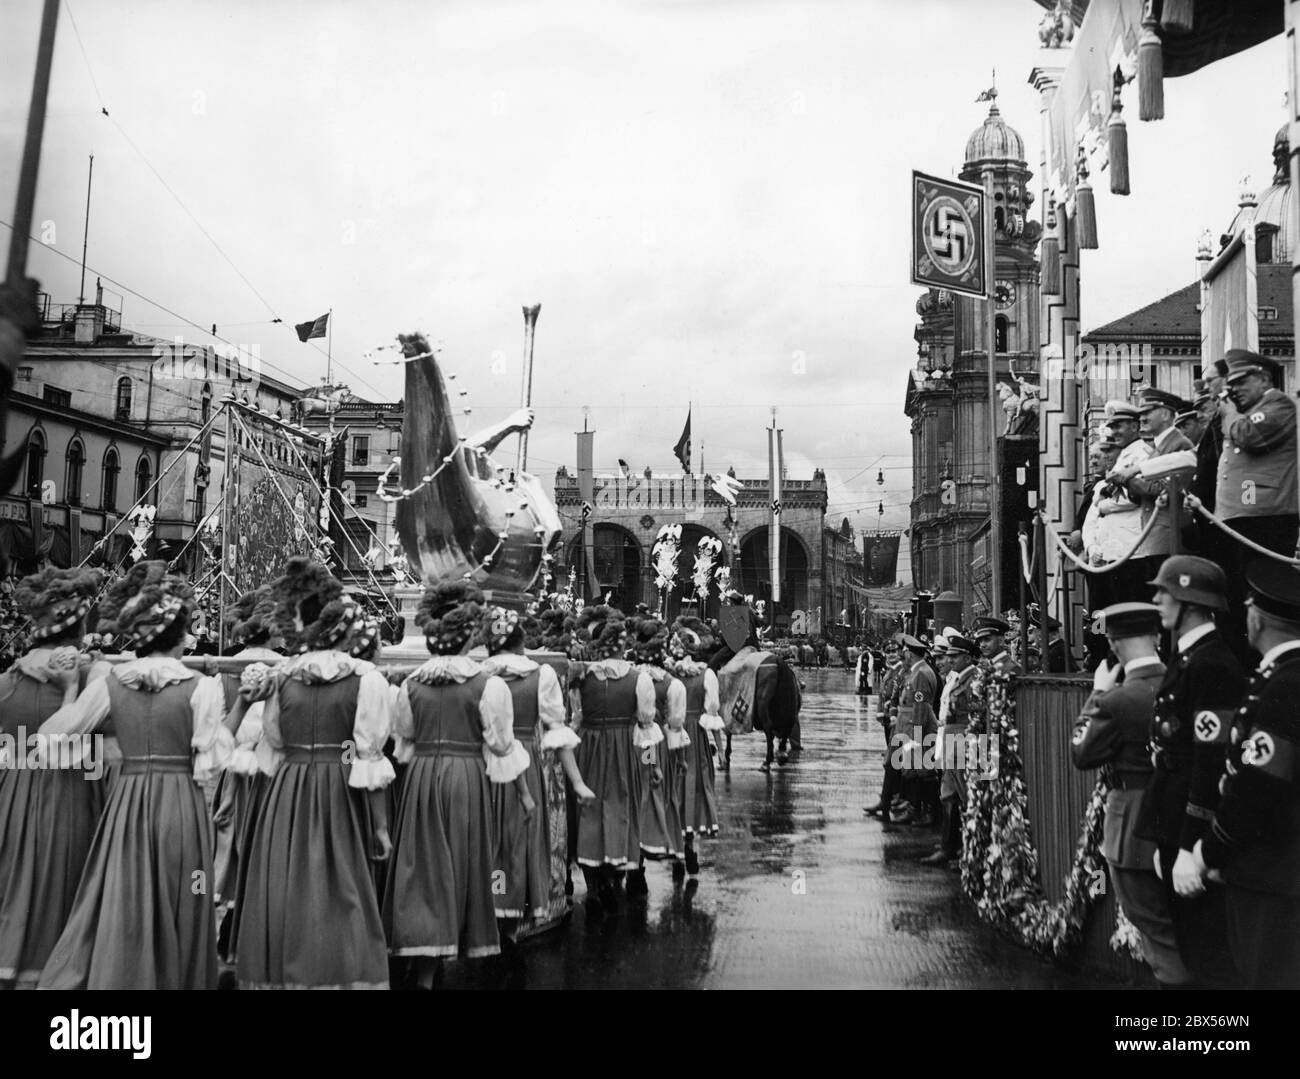 On the day of the German art a parade takes place in Munich. Here the Sudetenland group in folk costume marches past the VIP tribune with a sculpture and a map on the Odeonsplatz in front of the Feldherrnhalle and the Theatinerkirche. On this stand from left to right: Dino Alfieri, Adolf Hitler, Heinrich Hoffmann, who is taking photographs. In the background, Joseph Goebbels and Adolf Wagner. Stock Photo